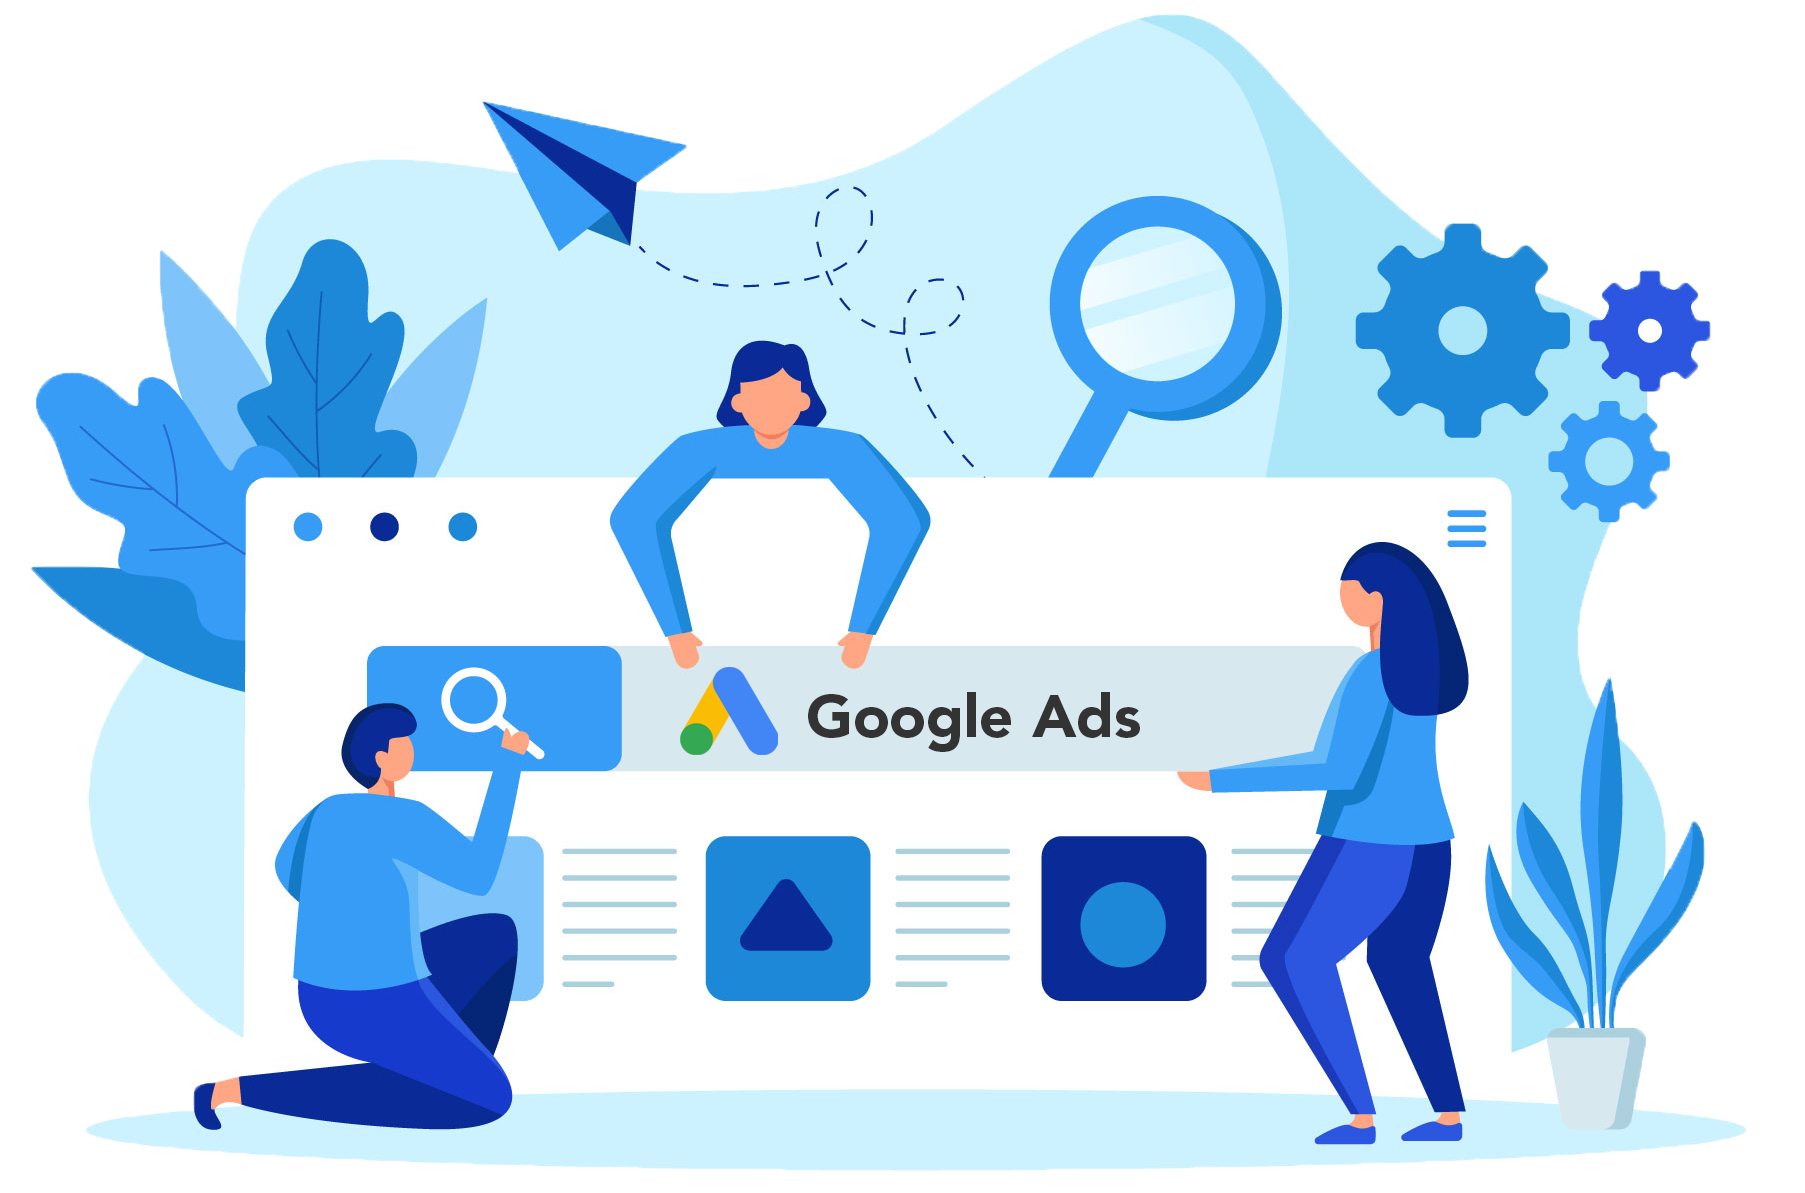 A graphic showing people working on a Google Ads campaign.